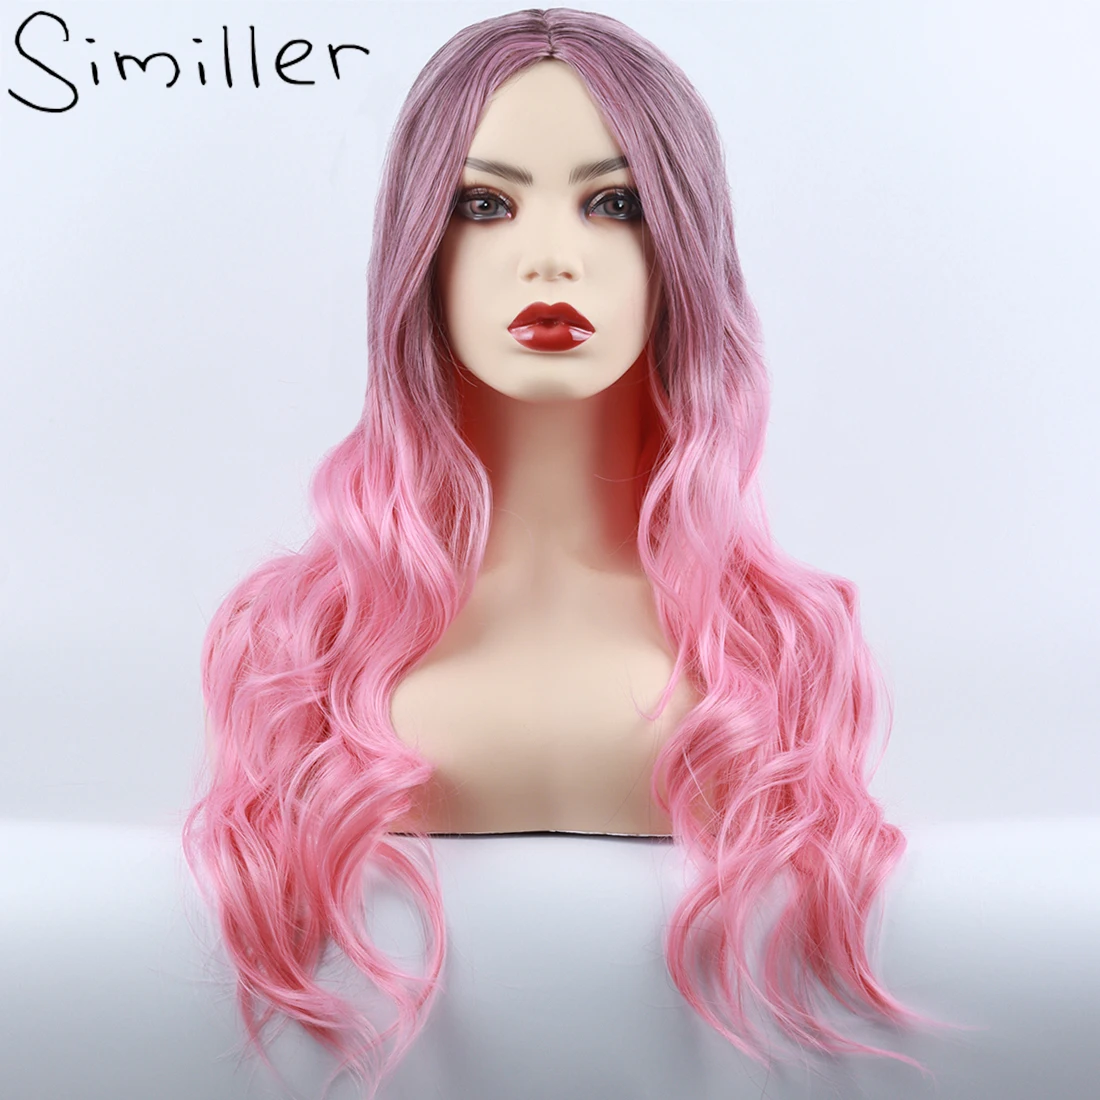 

Similler Long Wavy Synthetic Wigs for Women Dark Root Heat Resistance Fiber Highlights Pink Ombre Cosplay Wig Central Part